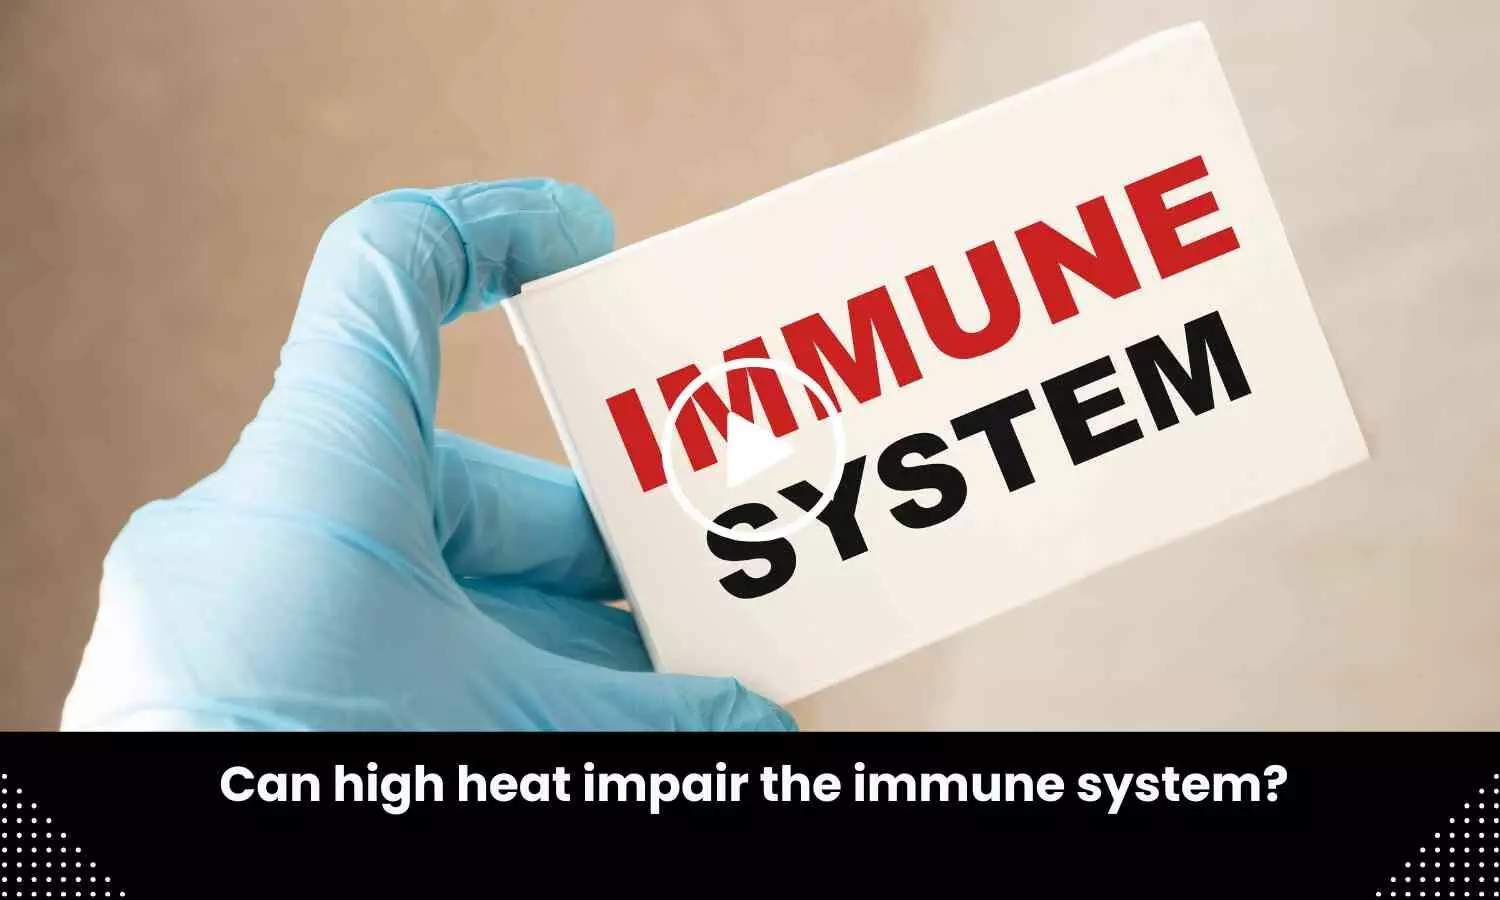 Can high heat impair the immune system?